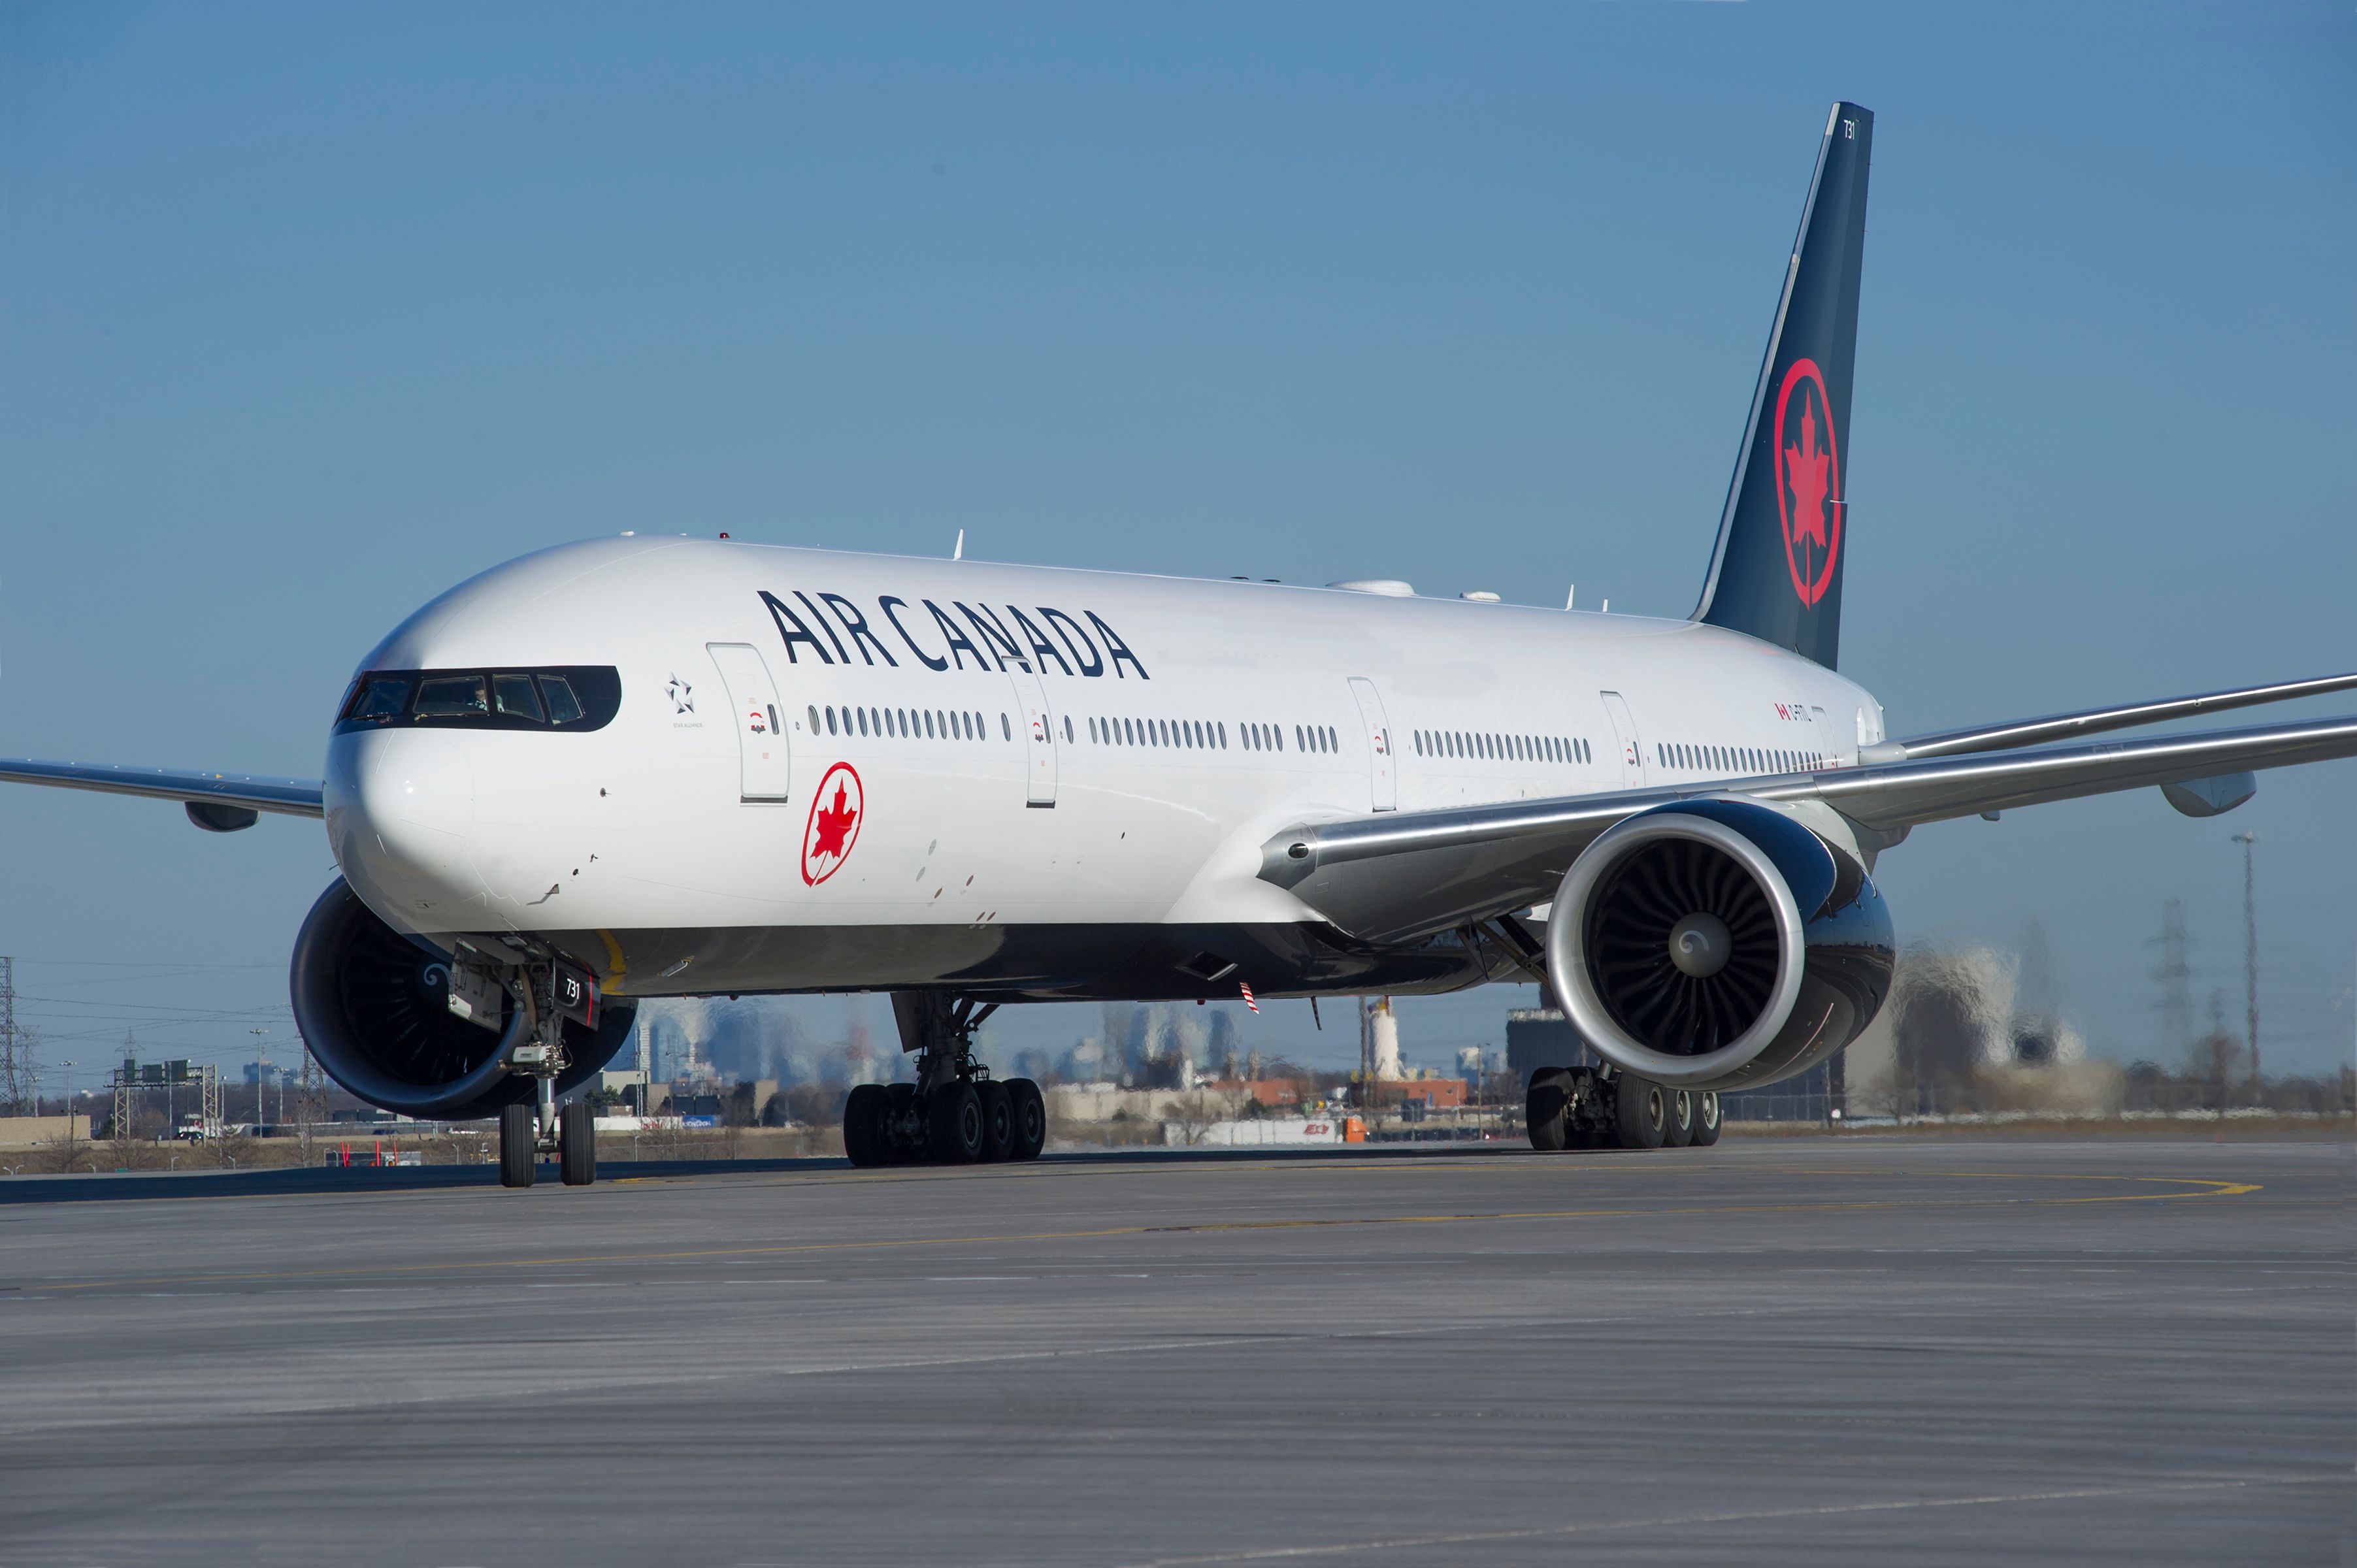 An Air Canada 777-300ER on a taxiway.